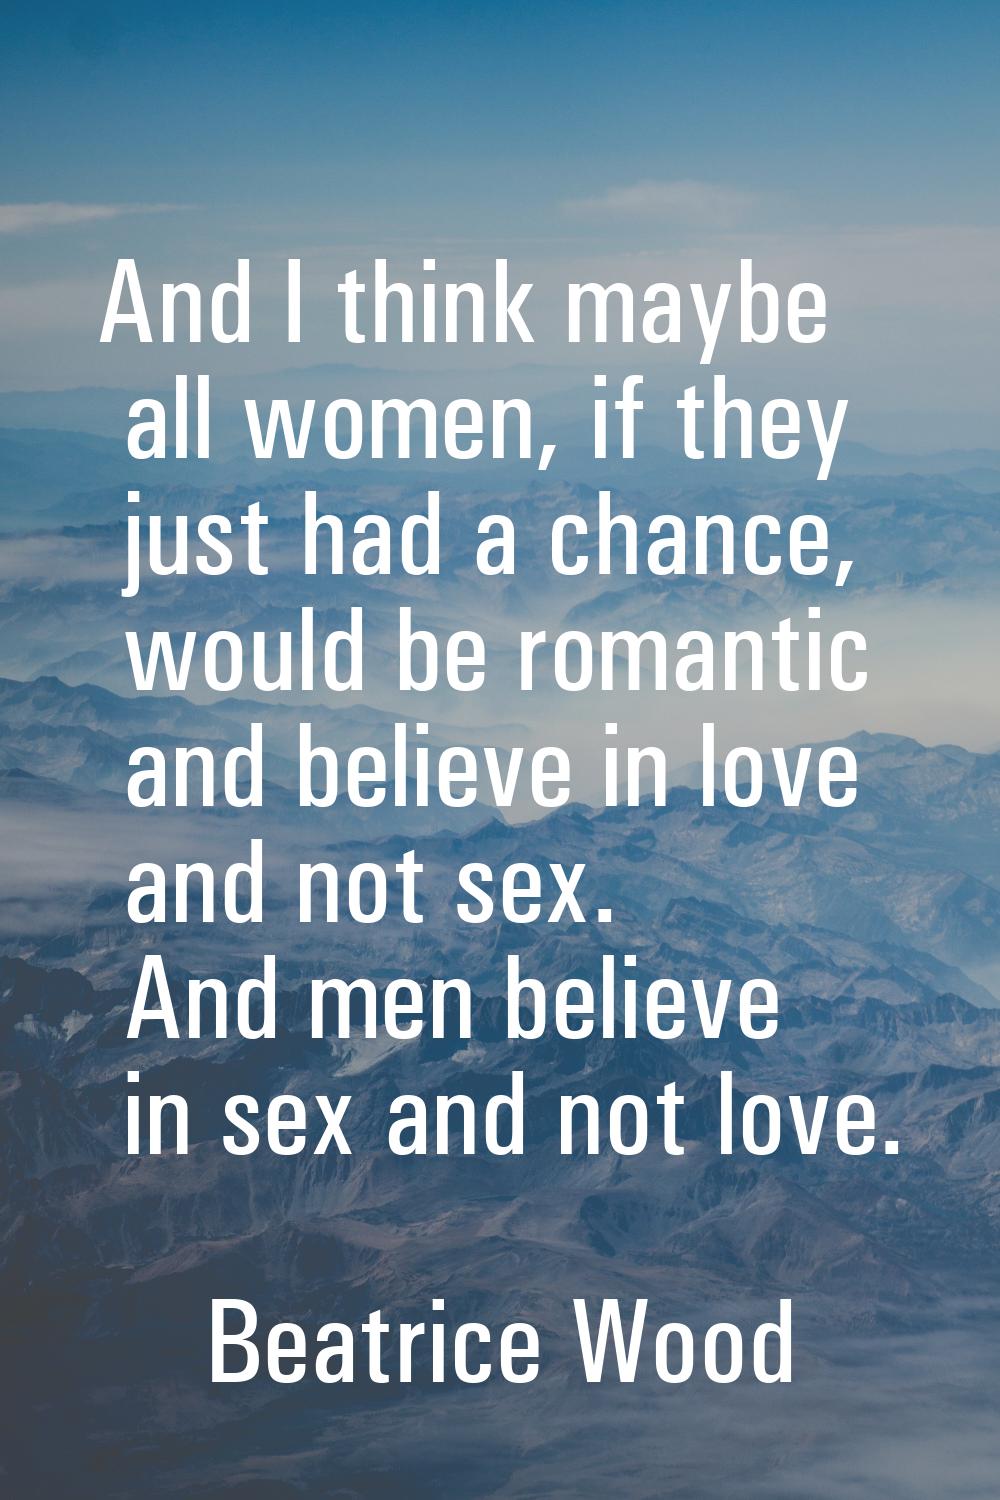 And I think maybe all women, if they just had a chance, would be romantic and believe in love and n